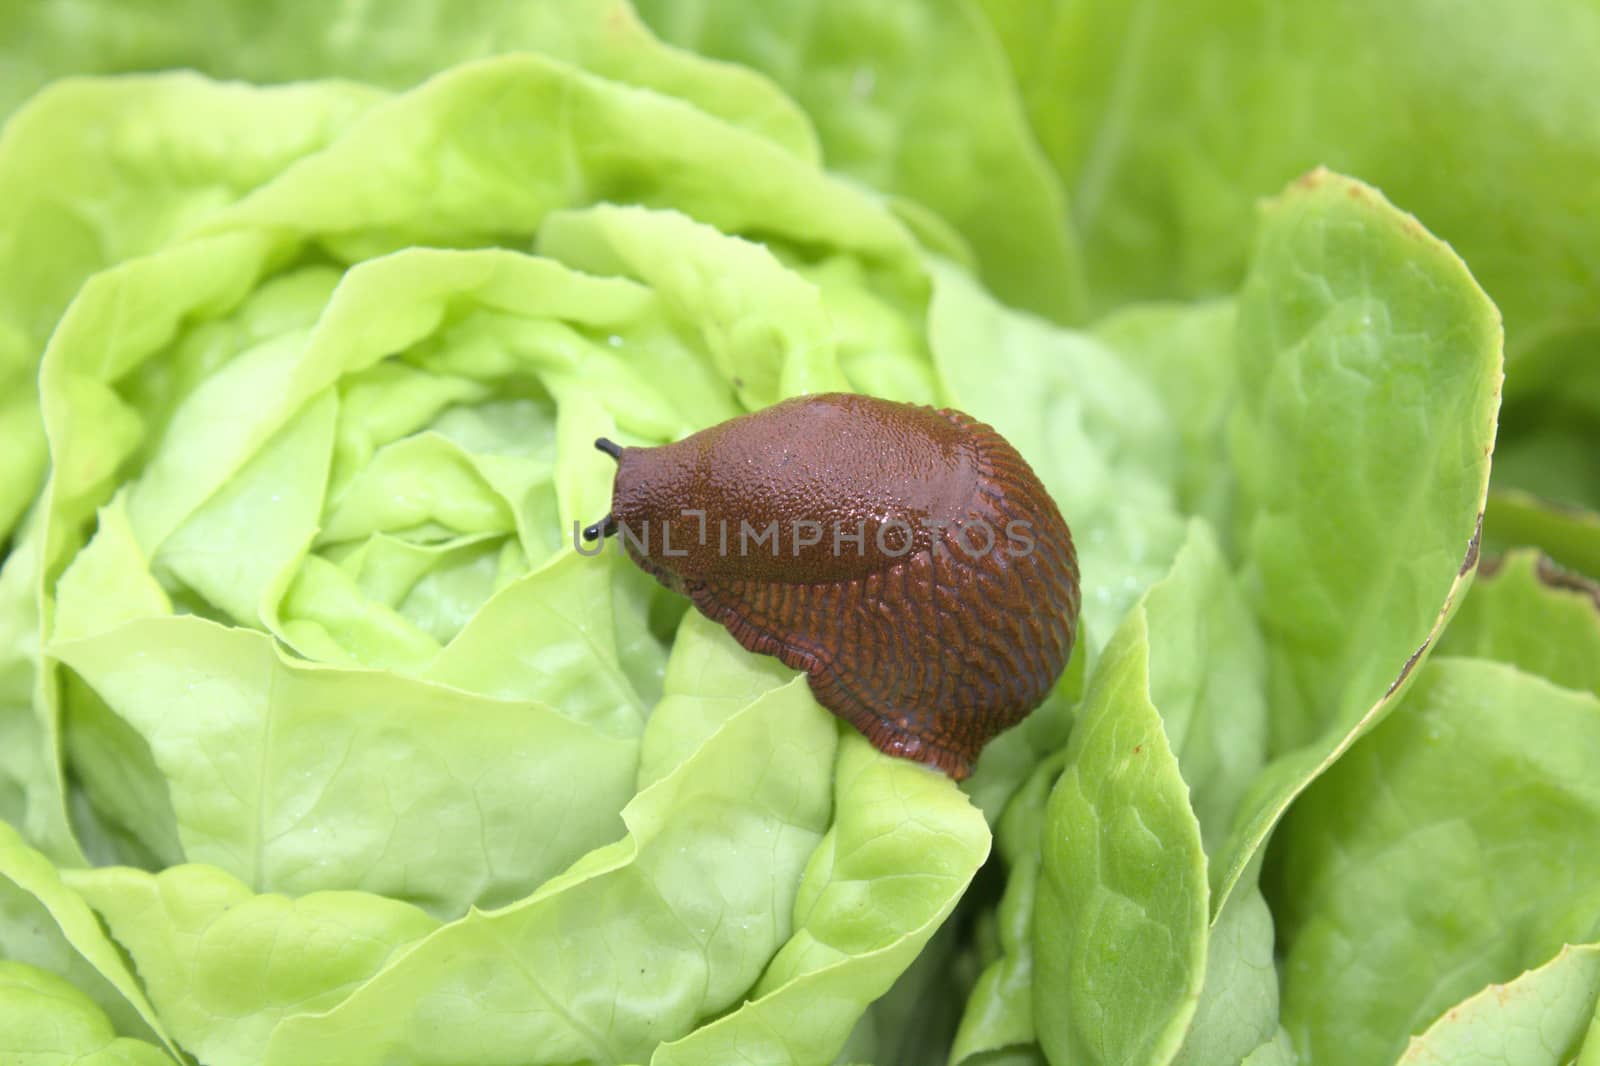 The picture shows red snail on a salad leaf